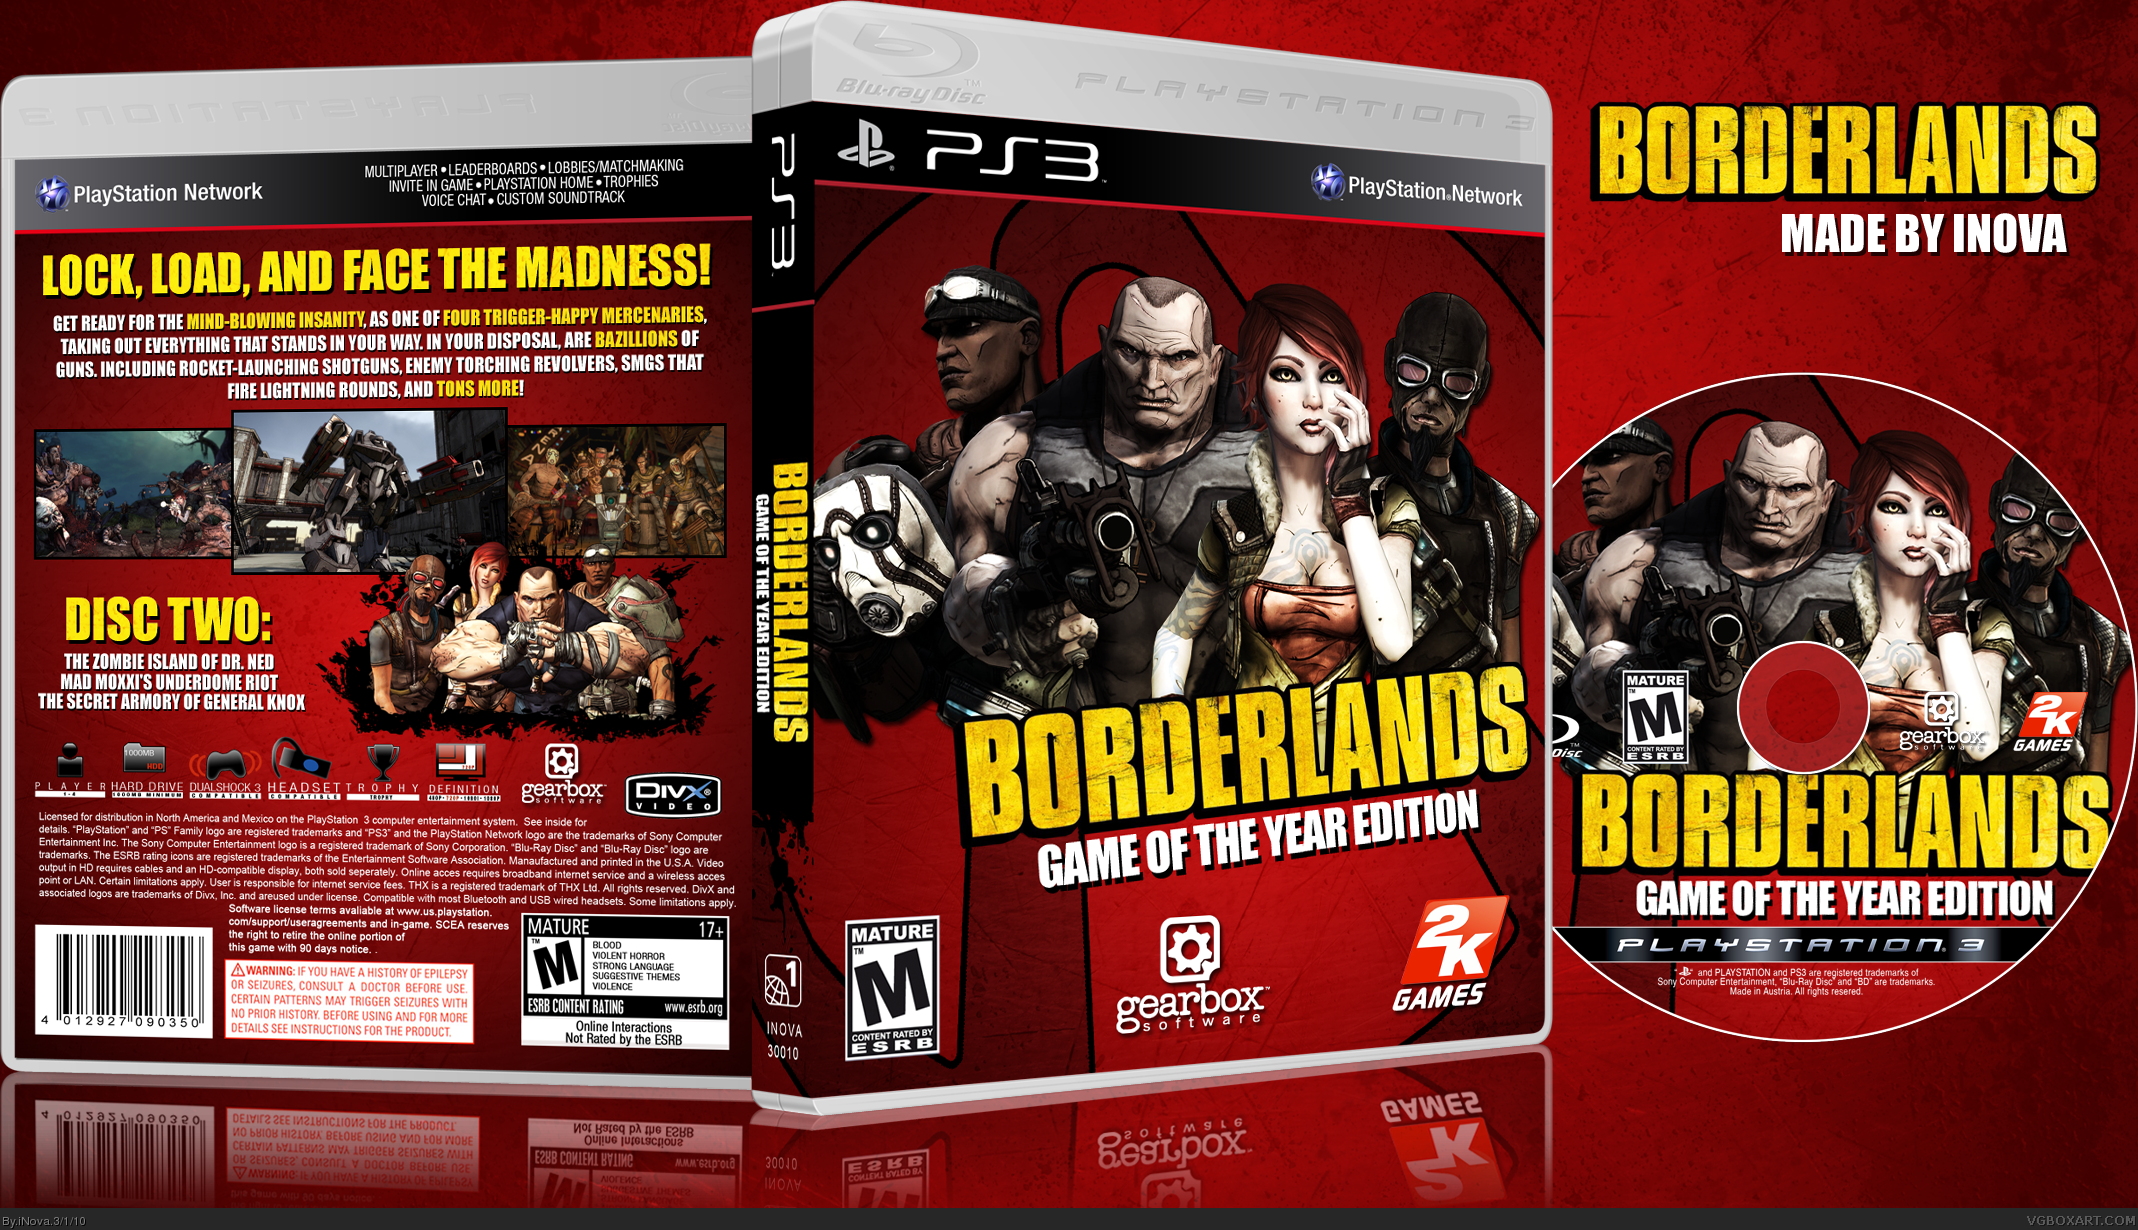 Borderlands Game Of The Year Edition Playstation 3 Box Art Cover By Inova